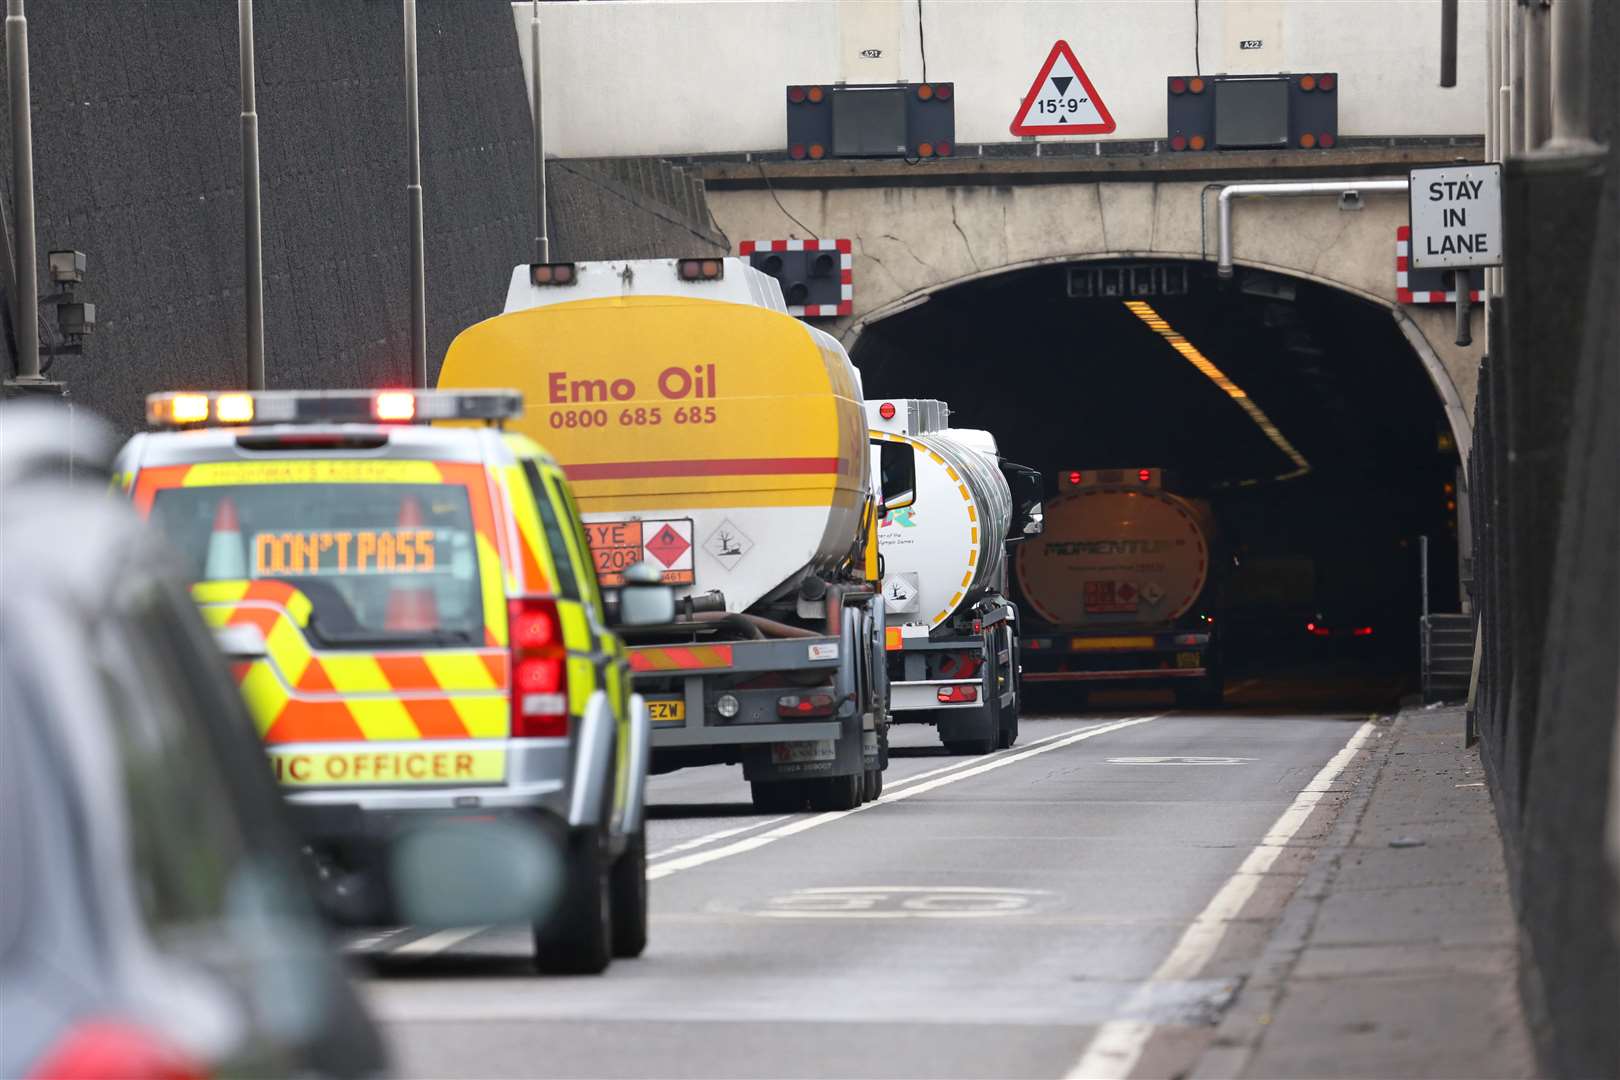 There are delays at the Dartford Crossing this afternoon